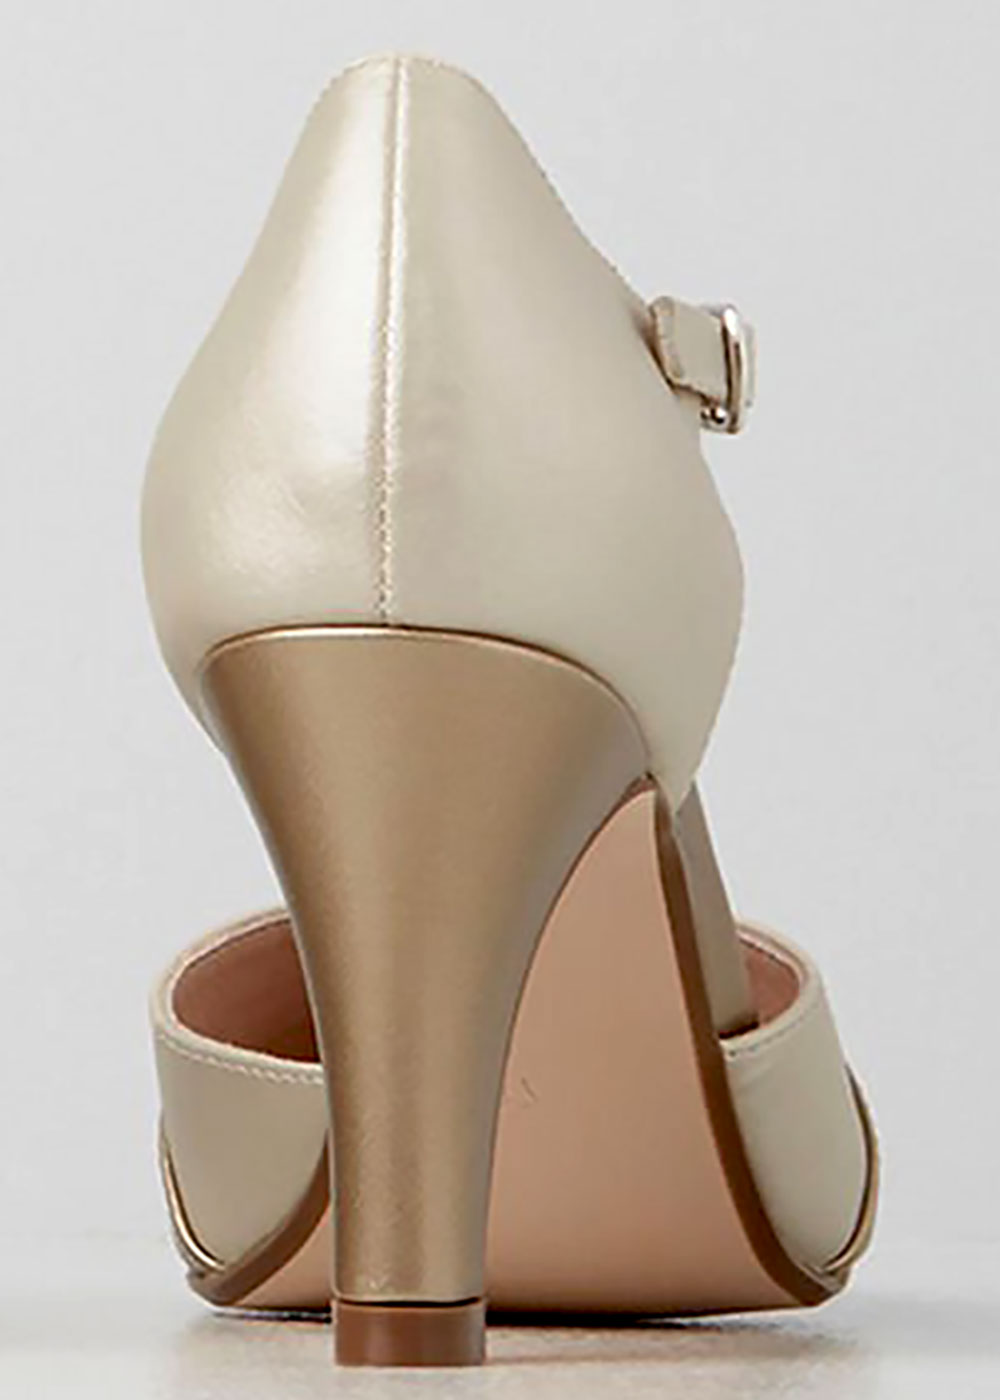 MARC JACOBS Womens Gold Comfort Metallic The Pump Pointed Toe Sculpted Heel  Slip On Leather Dress Pumps Shoes 38 - Walmart.com